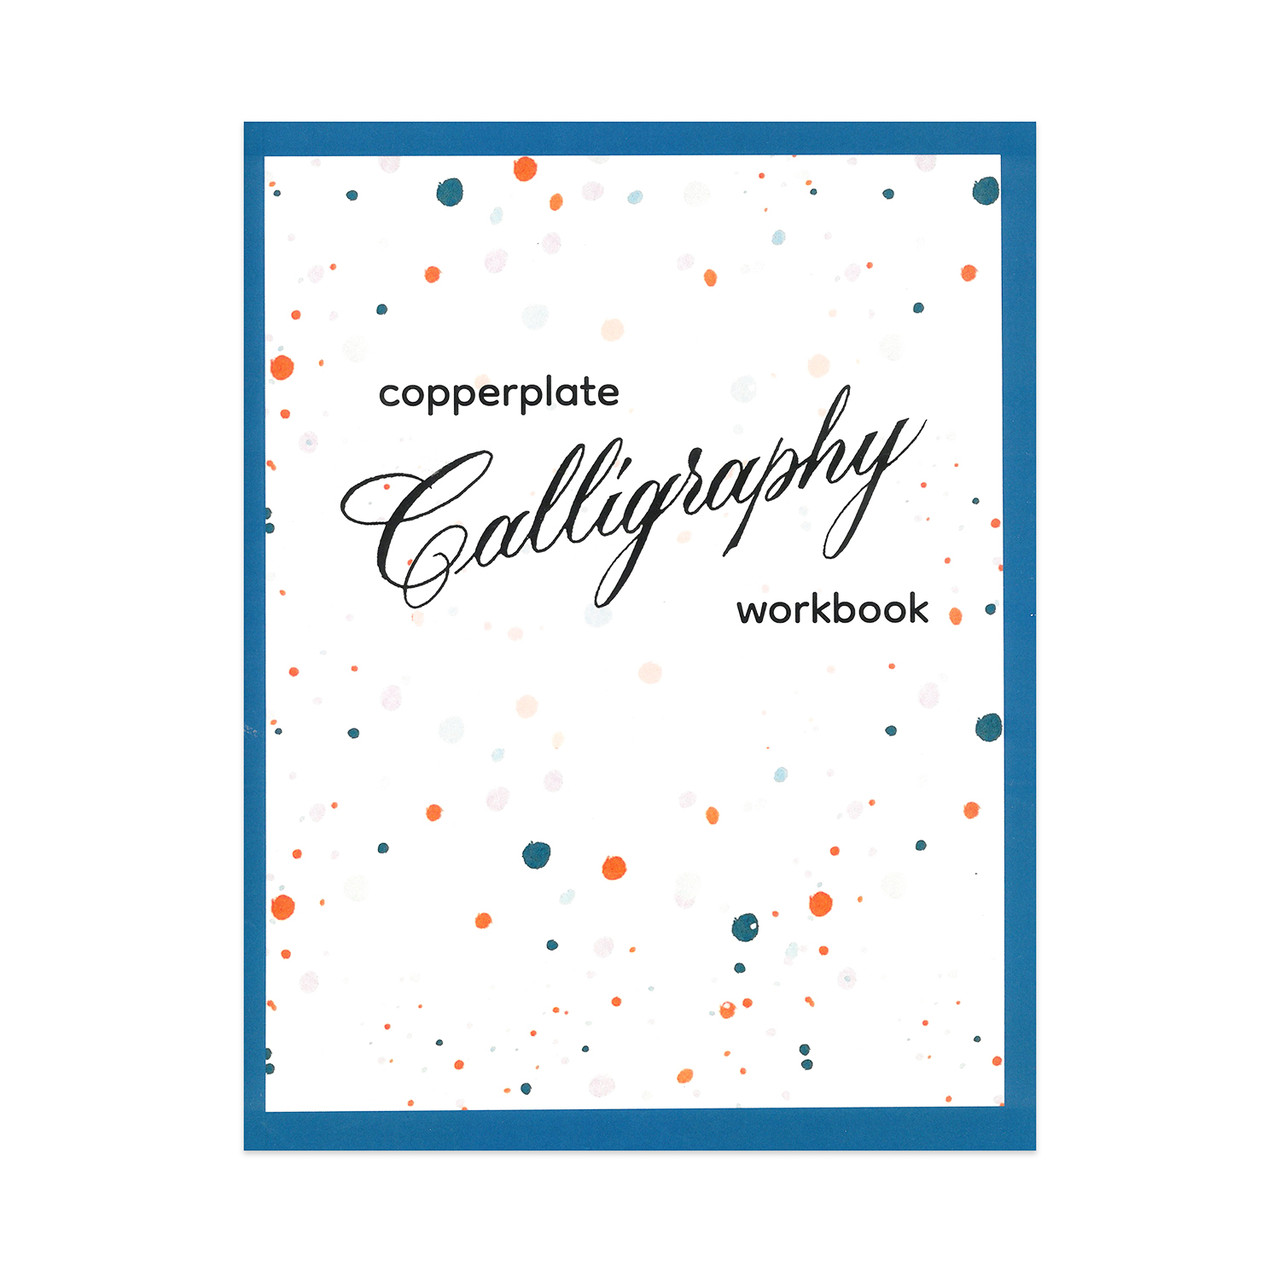 Copperplate Calligraphy Workbook by Laura Di Piazza